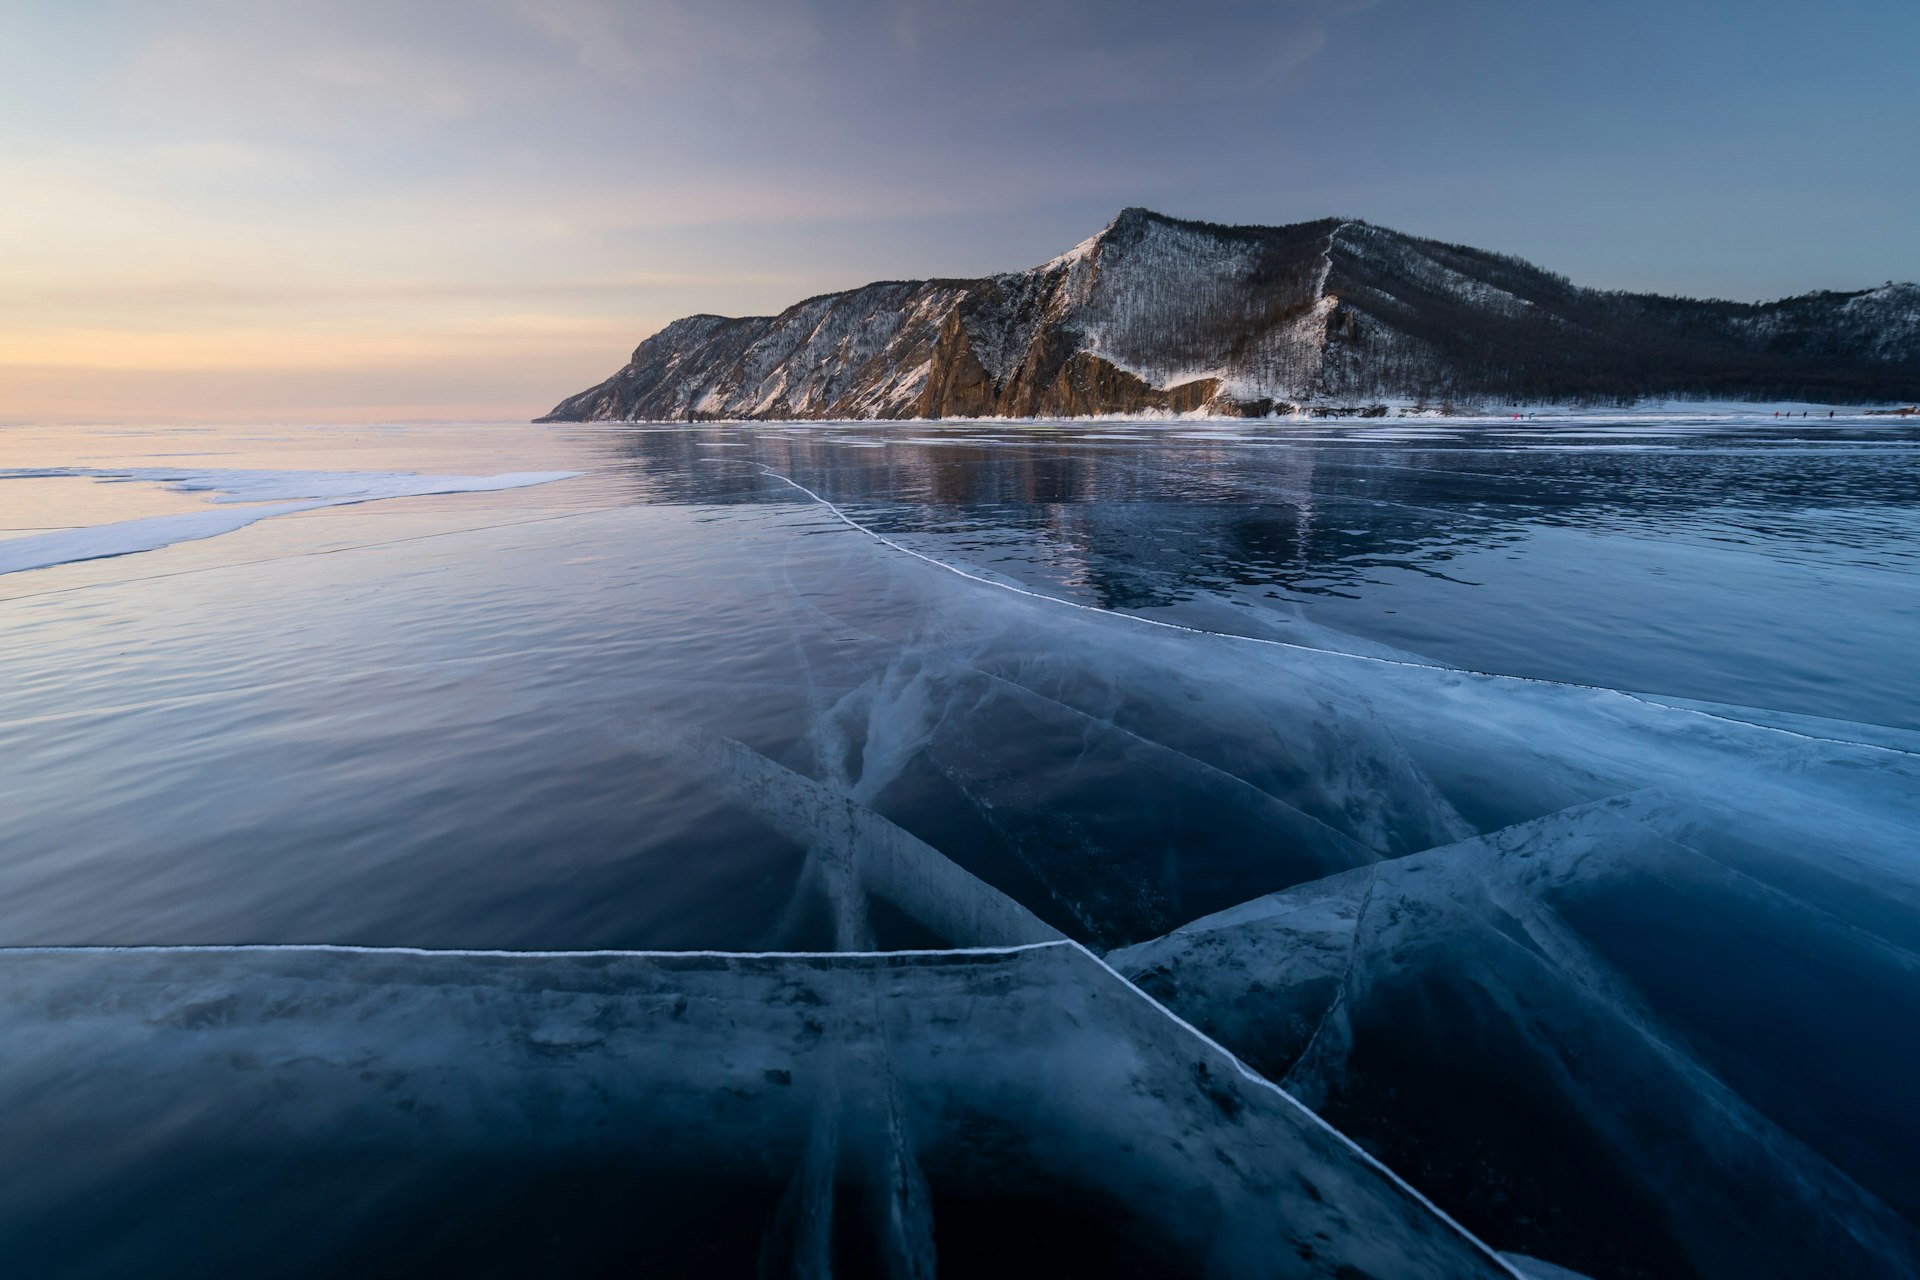 The sun rises over a steep rocky cliff standing up from the shoreline of the partially frozen Lake Baikal.